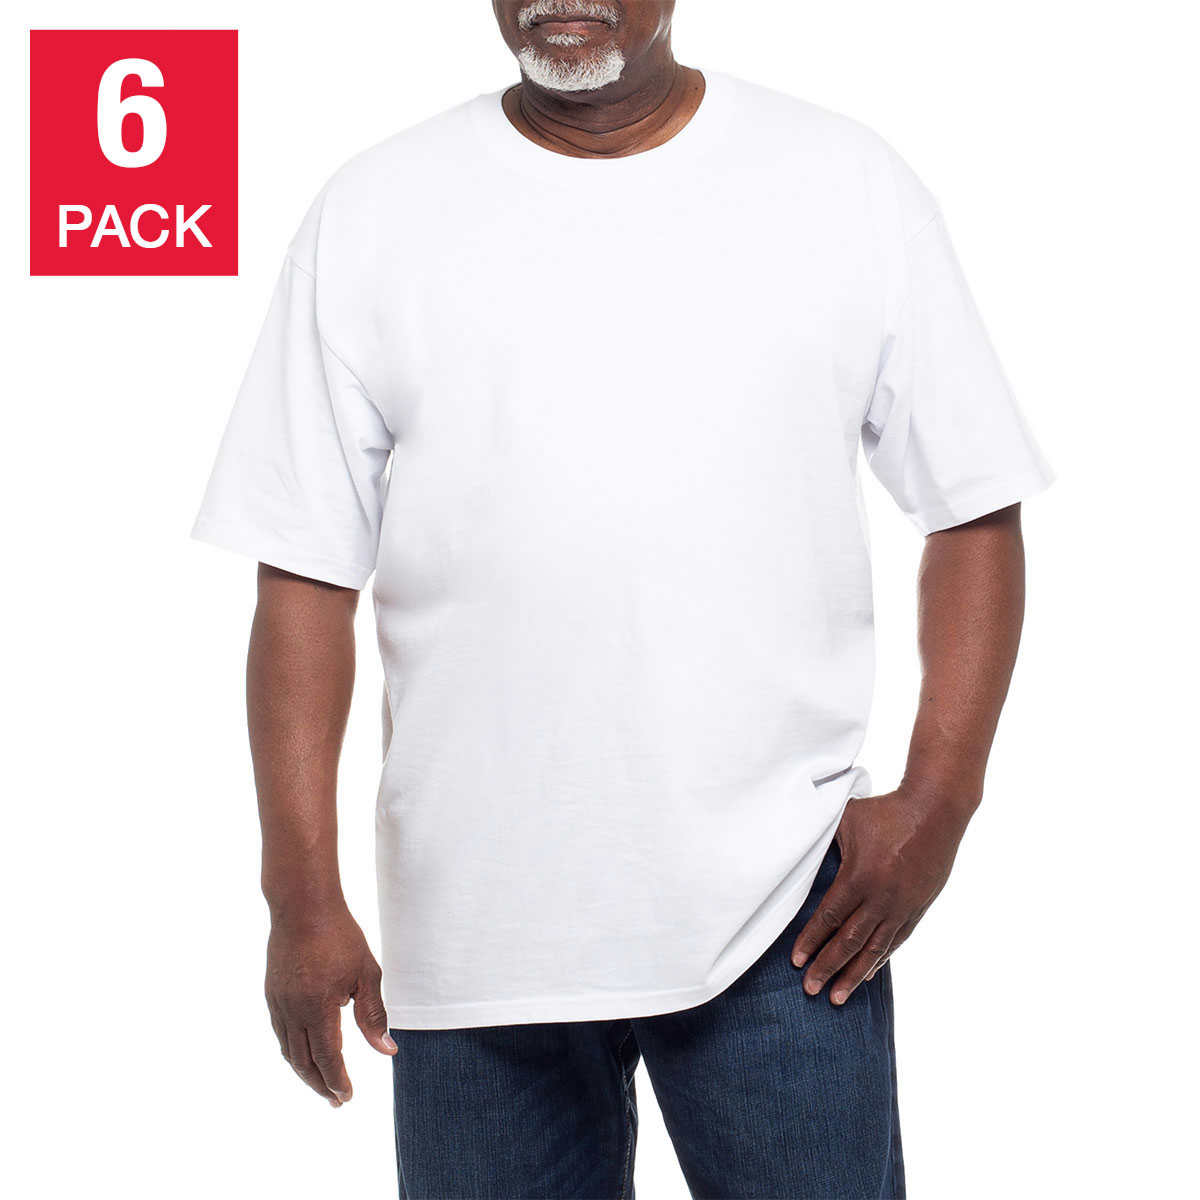 Cargobay Mens T shirt Pack of 6 & Pack of 2 Plain Crew Neck Cotton Tee Shirt Top 